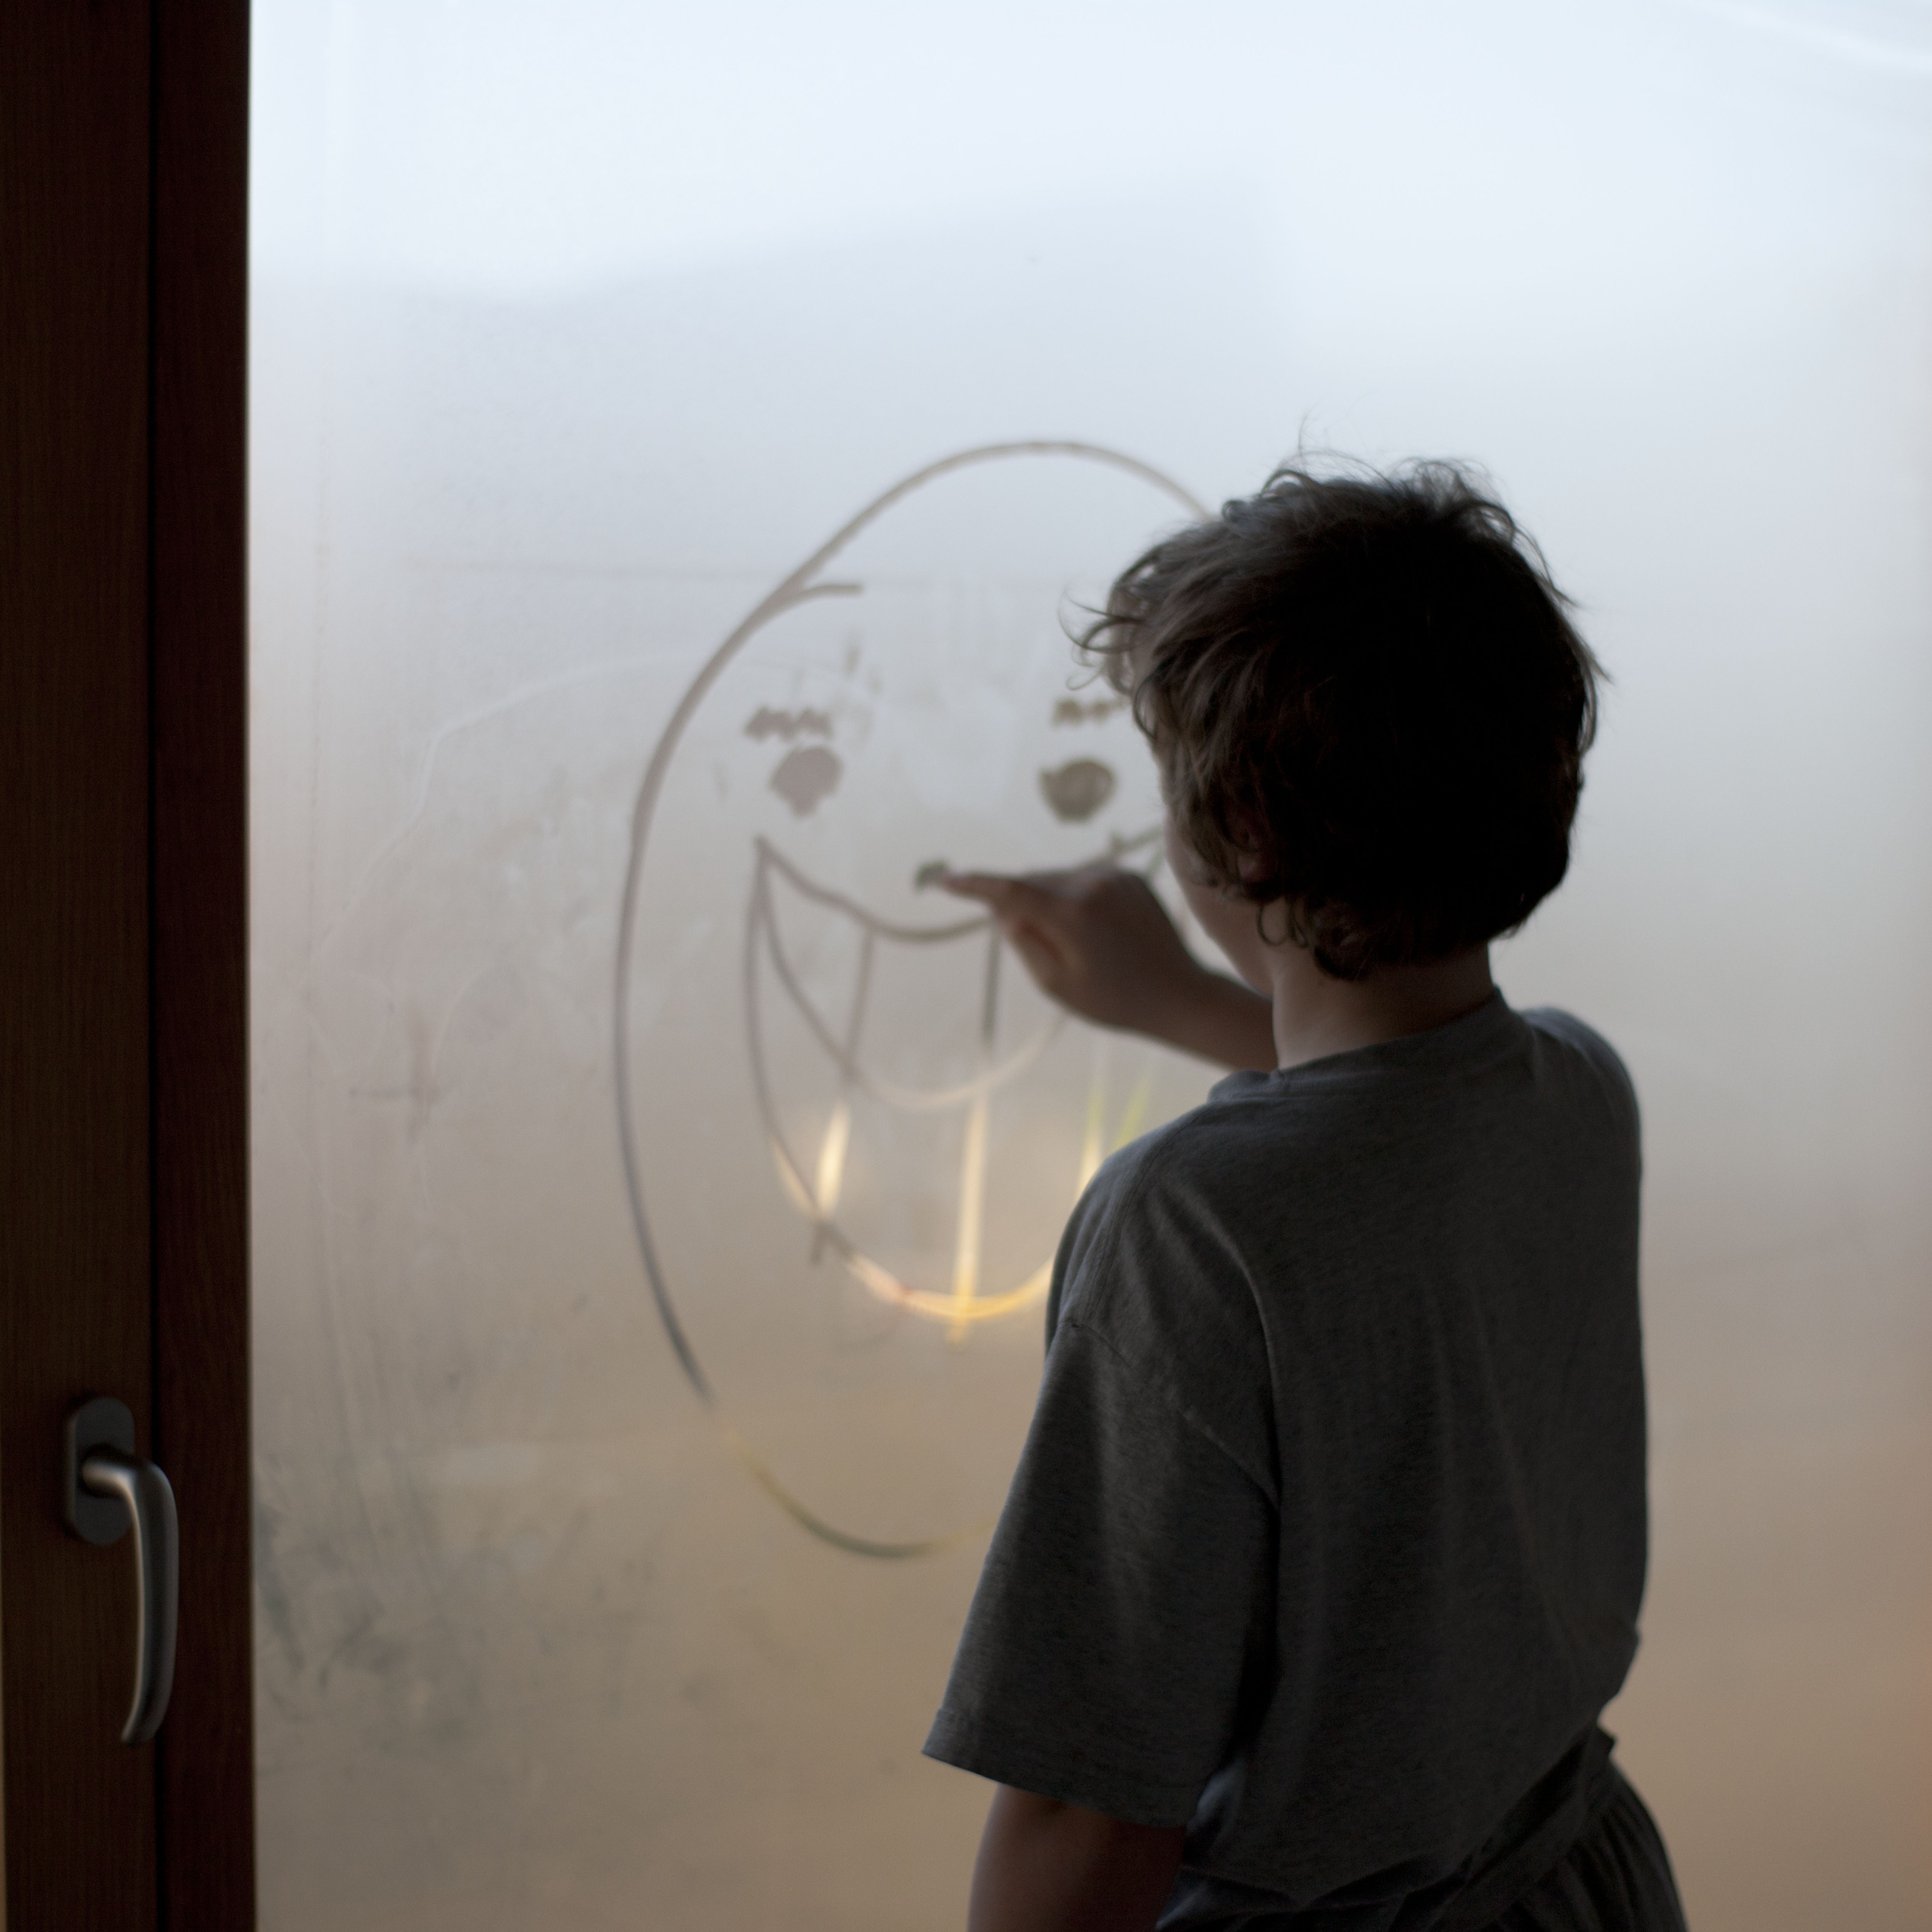 A boy drawing a face on a misted window with his finger